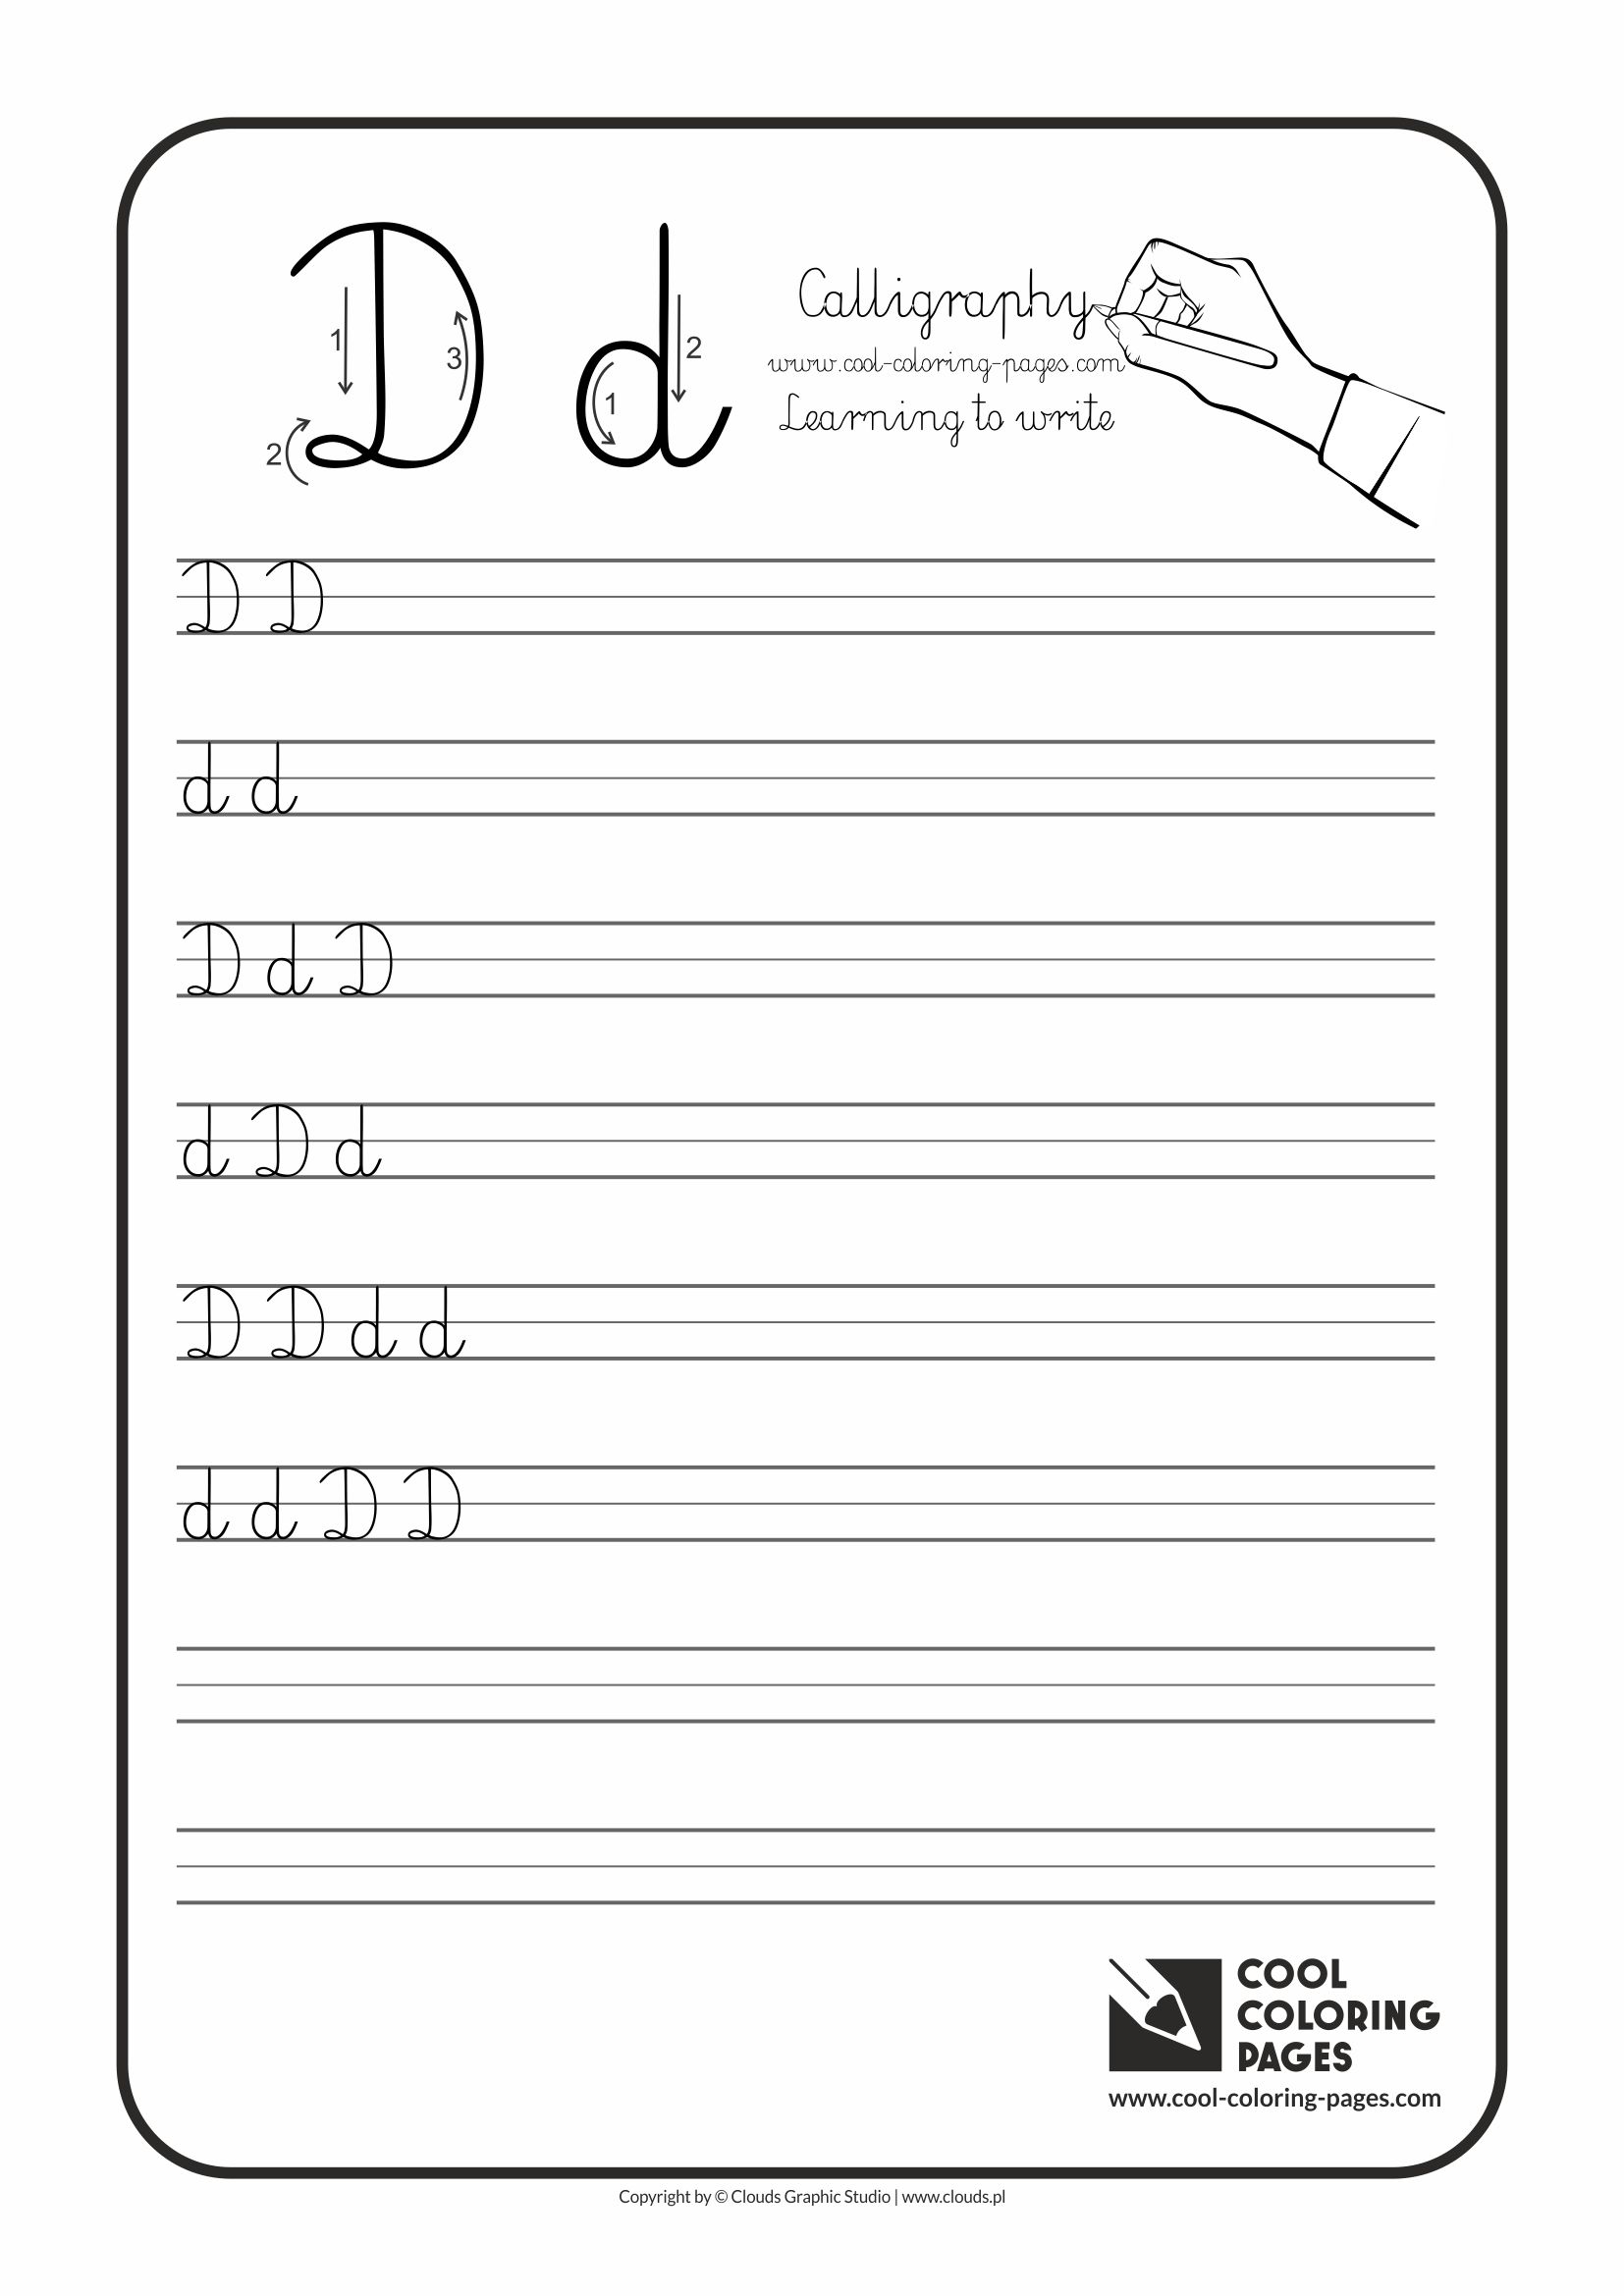 Cool Coloring Pages / Calligraphy / Letter D - Handwriting for kids / Worksheets